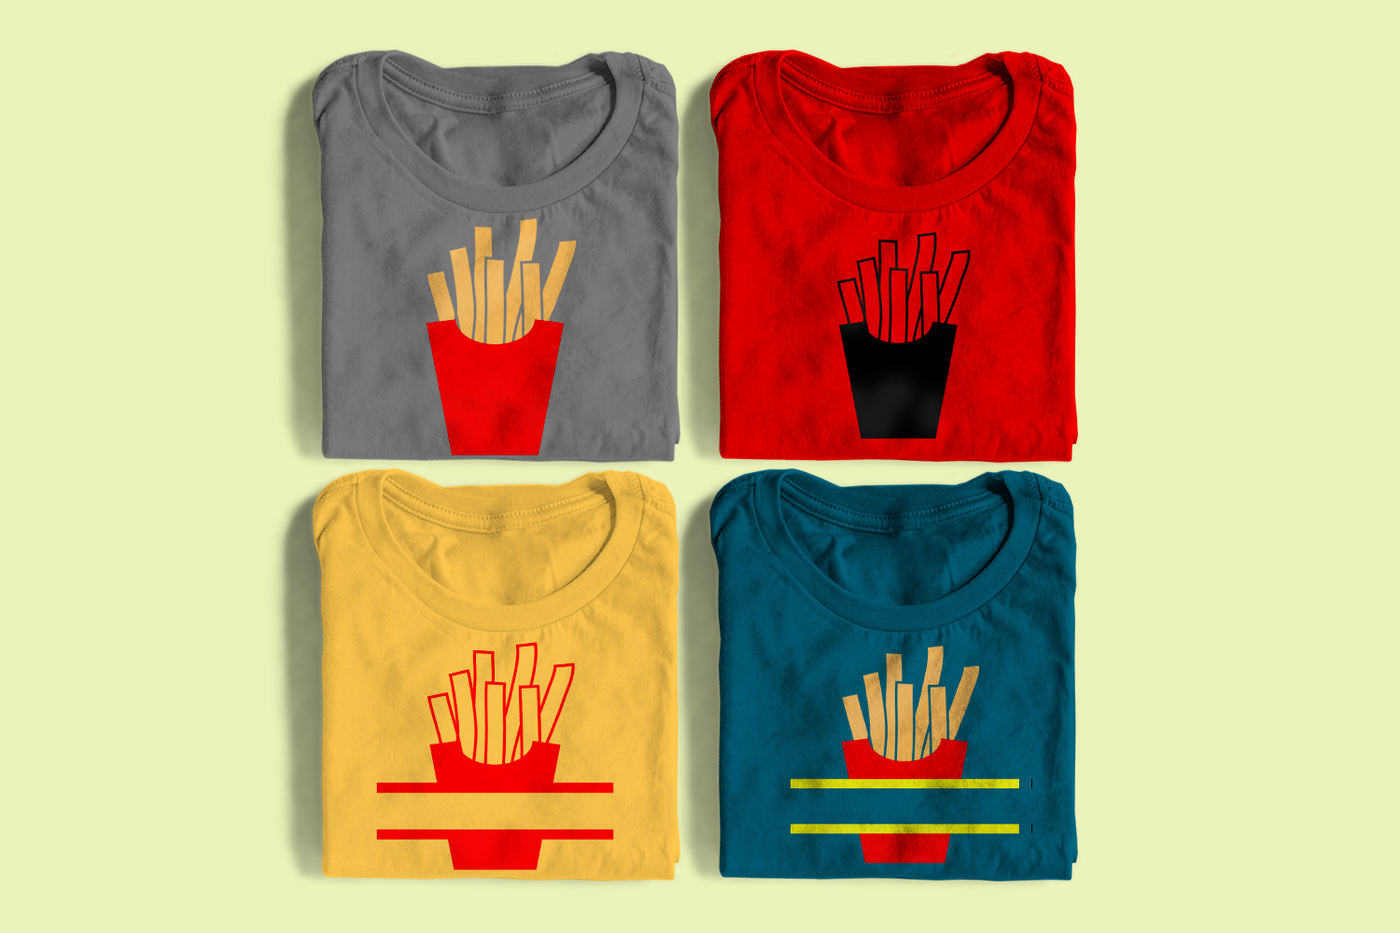 Four folded shirts, each has an image of a french fry container. Half are in single color, half are multicolor. Two have splits in the middle.